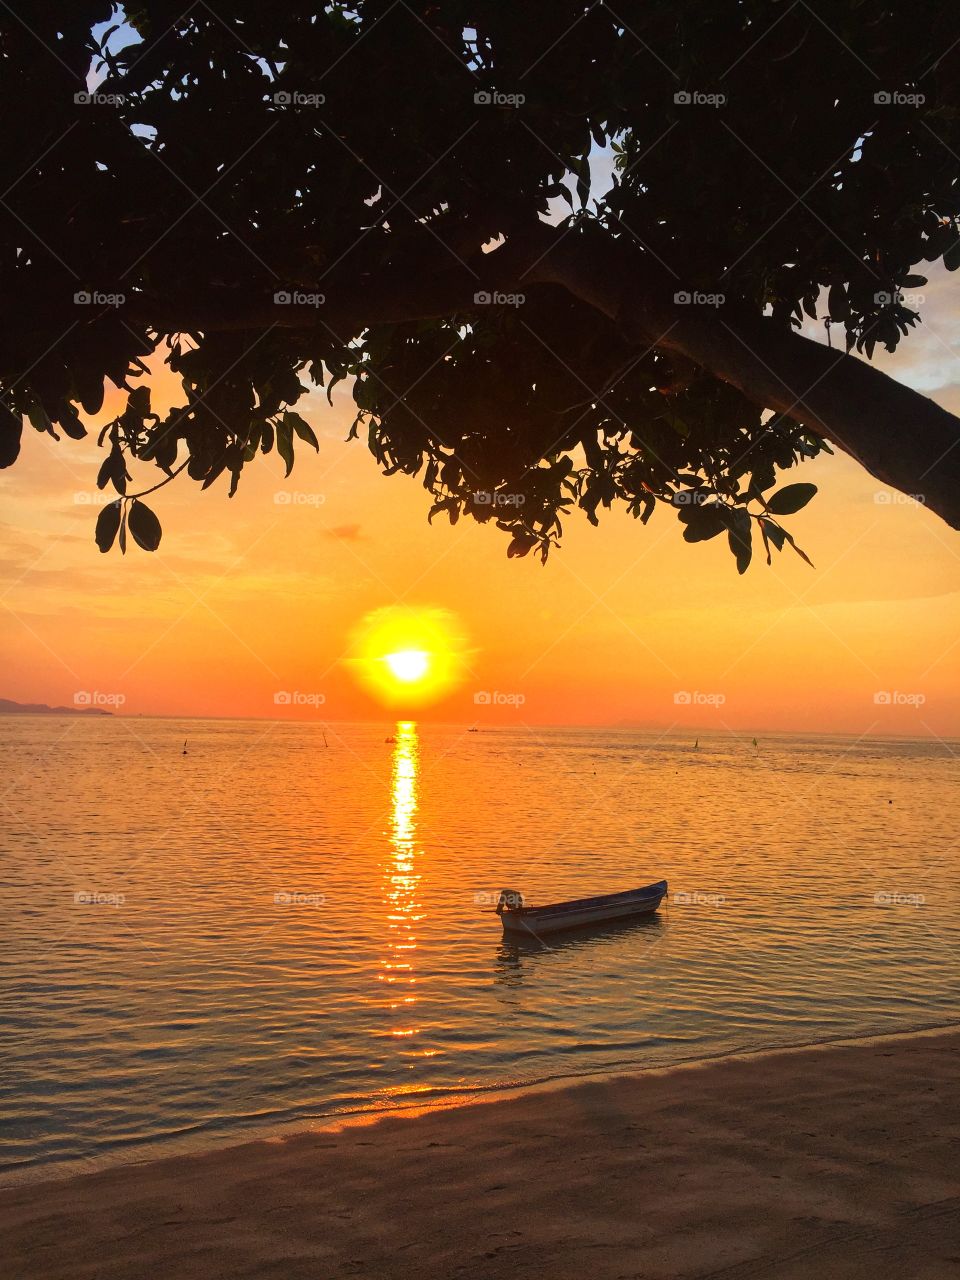 Sunset in Thailand, on the island of Koh Pangan. Beautiful spot to watch the sun go down